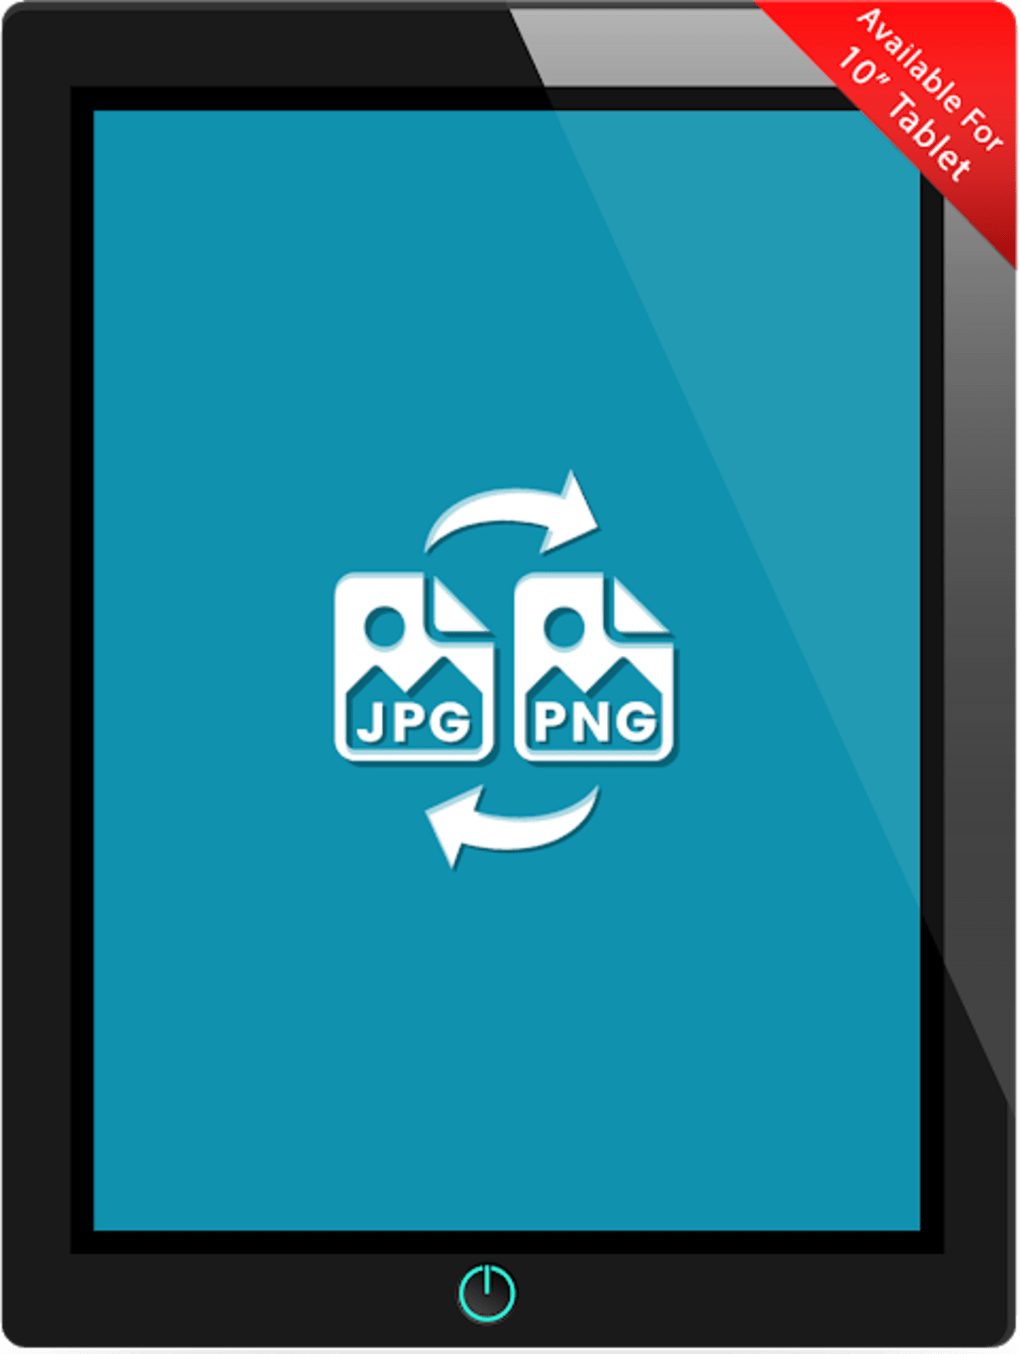 image-to-jpg-png-image-converter-apk-voor-android-download